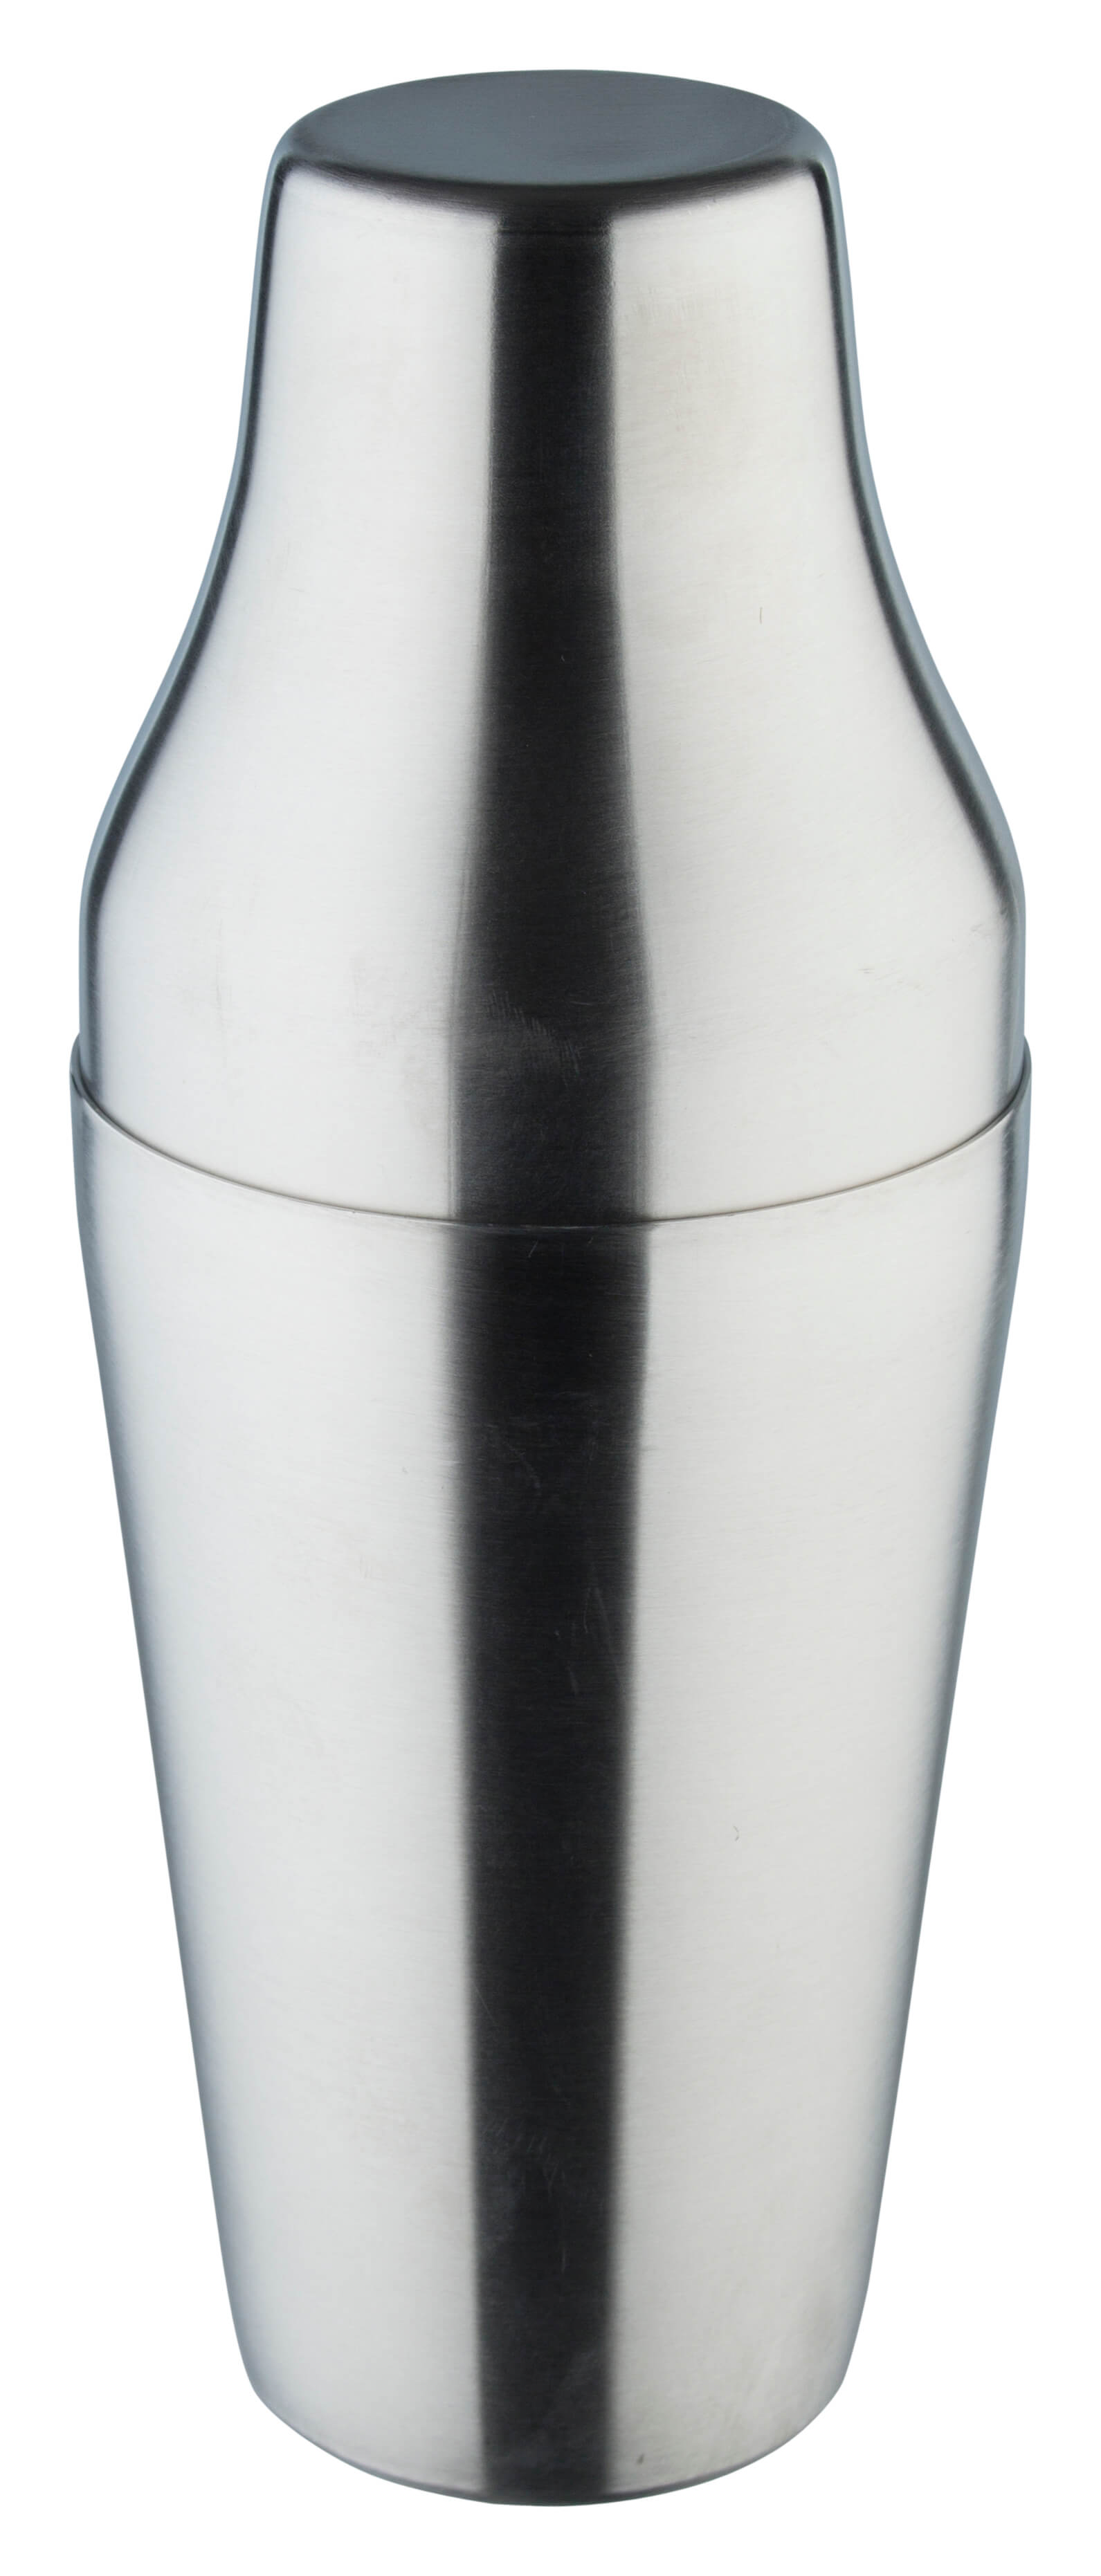 Cocktail shaker, BAR AID, dull stainless steel, twopartite (500ml)